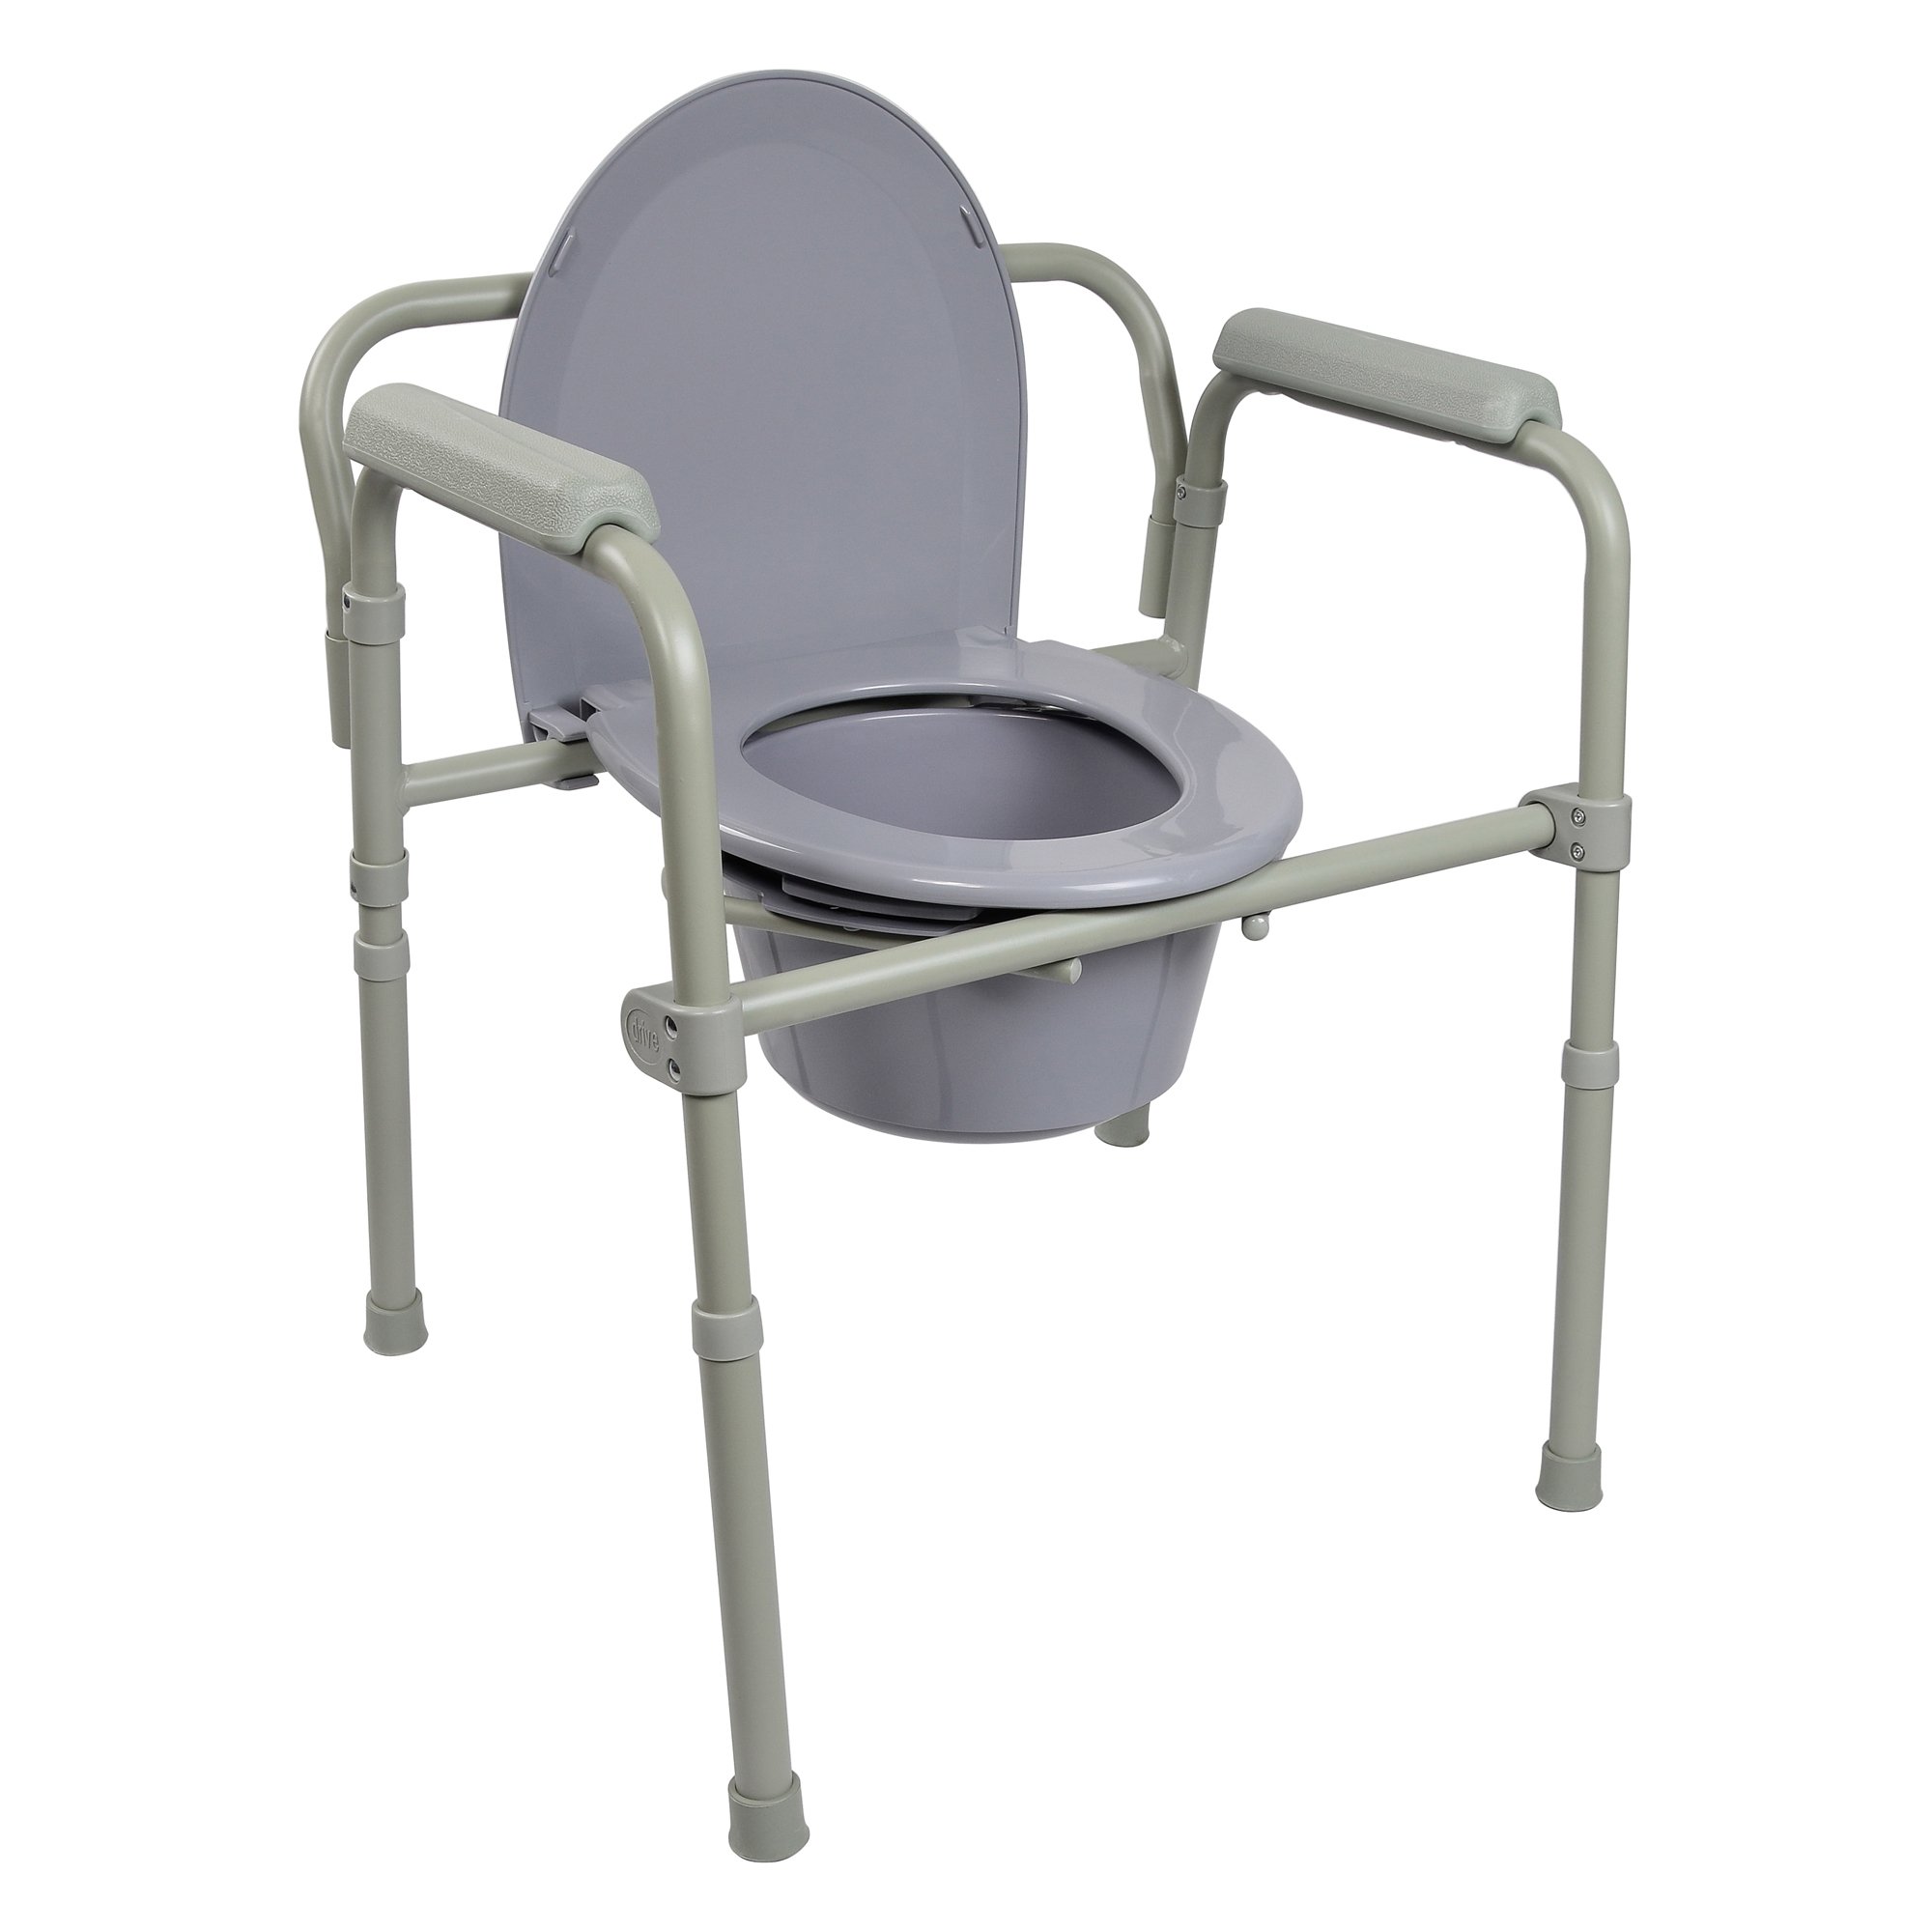 McKesson Commode Chair 13-1/2 Inch Seat Width 350 Lbs. Weight Capacity, Gray , CVS